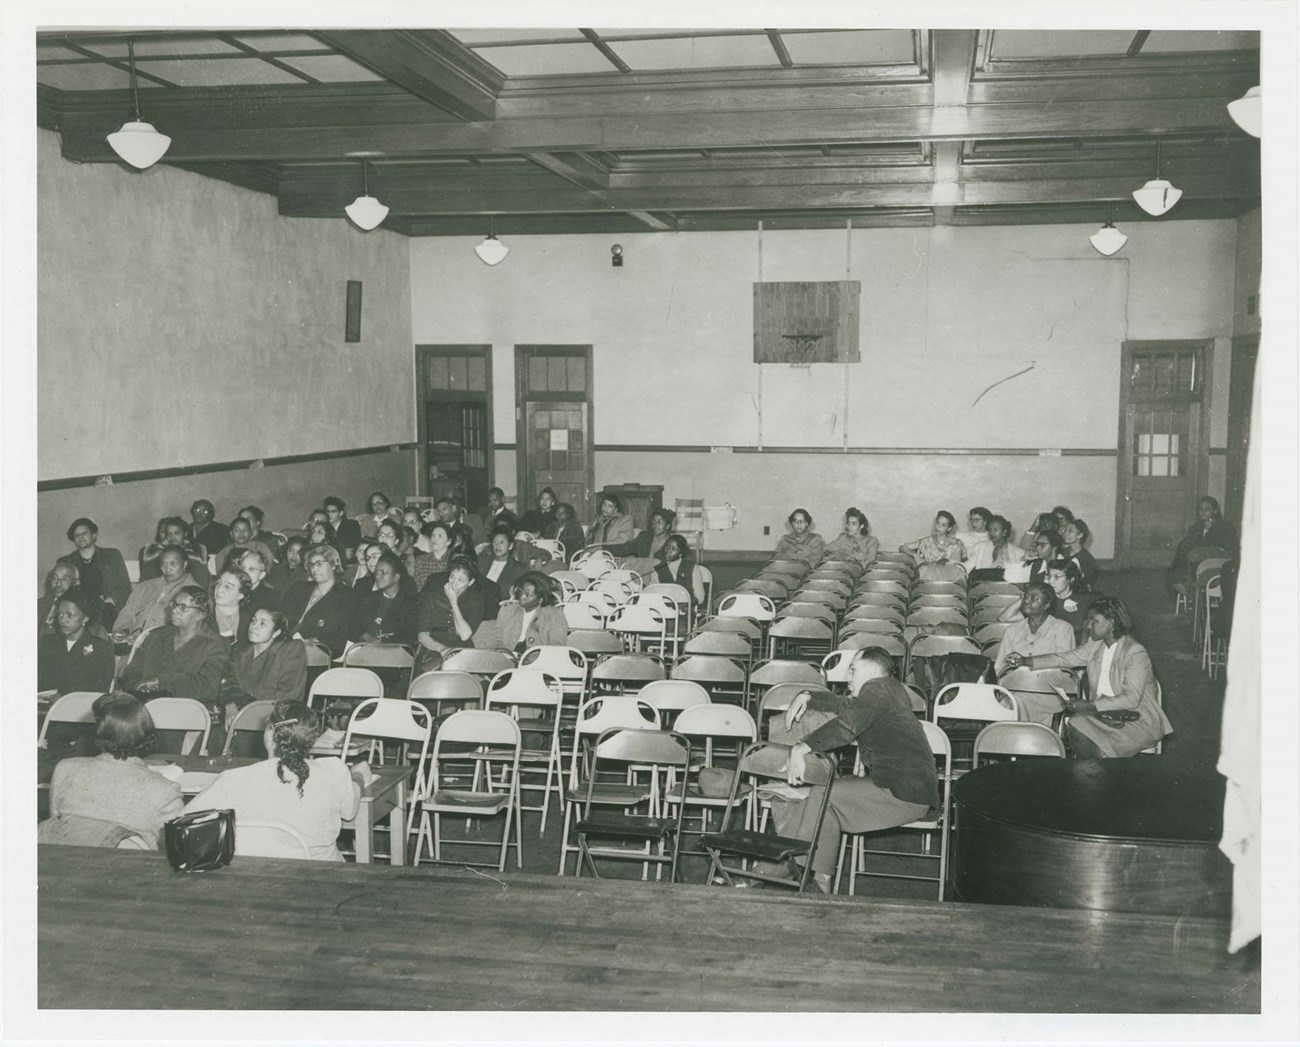 Auditorium at Robert Russa Moton High School, Farmville , Virginia with students sitting in seats. Courtesy National Archives.